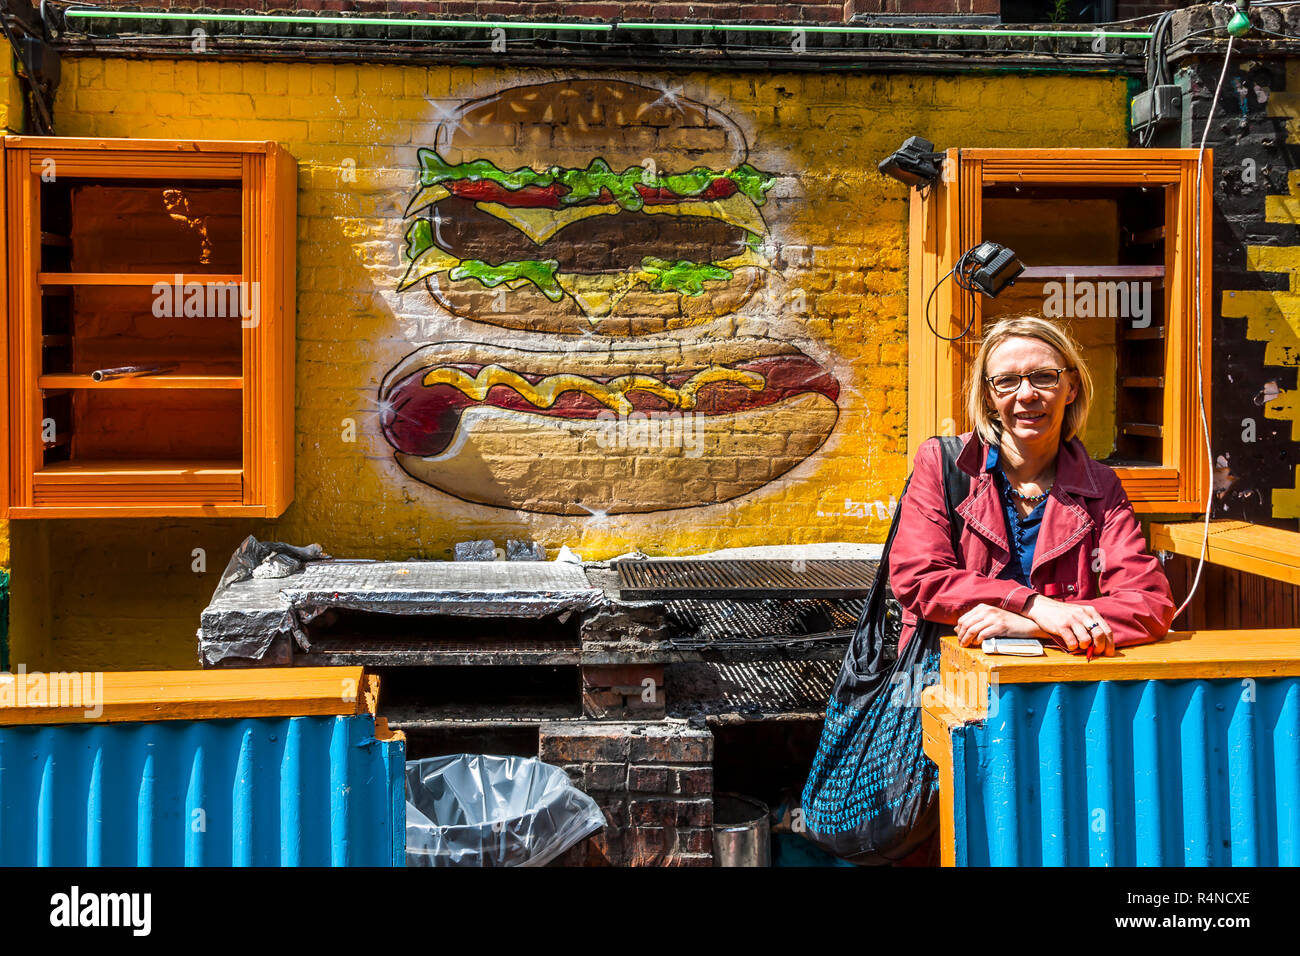 Burger and Hot Dog. Street Art in London Stock Photo